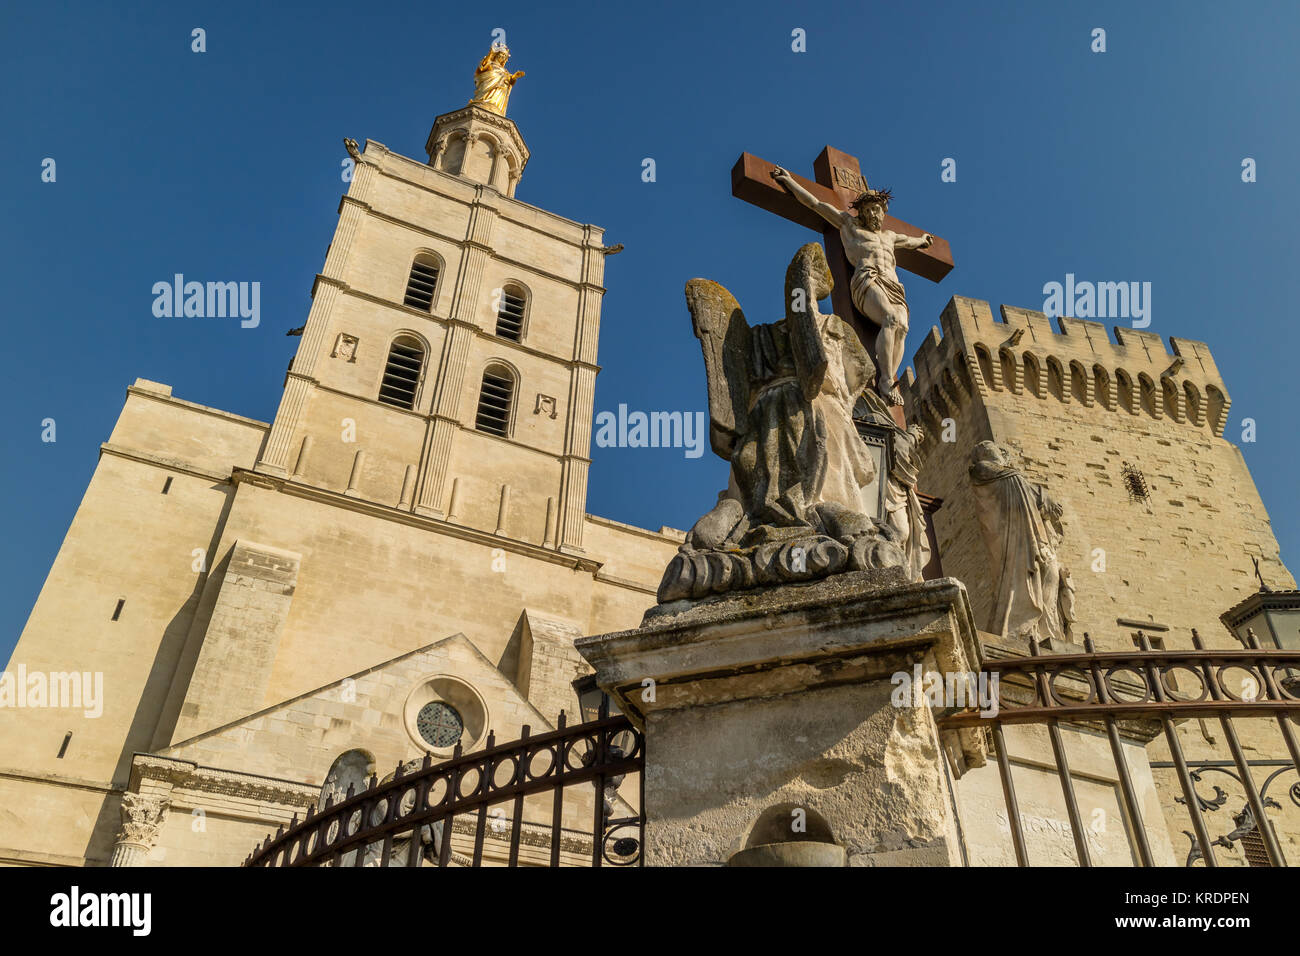 Statues and tower of the 14th century Papal Palace, Avignon, Provence, France. 2017. Stock Photo